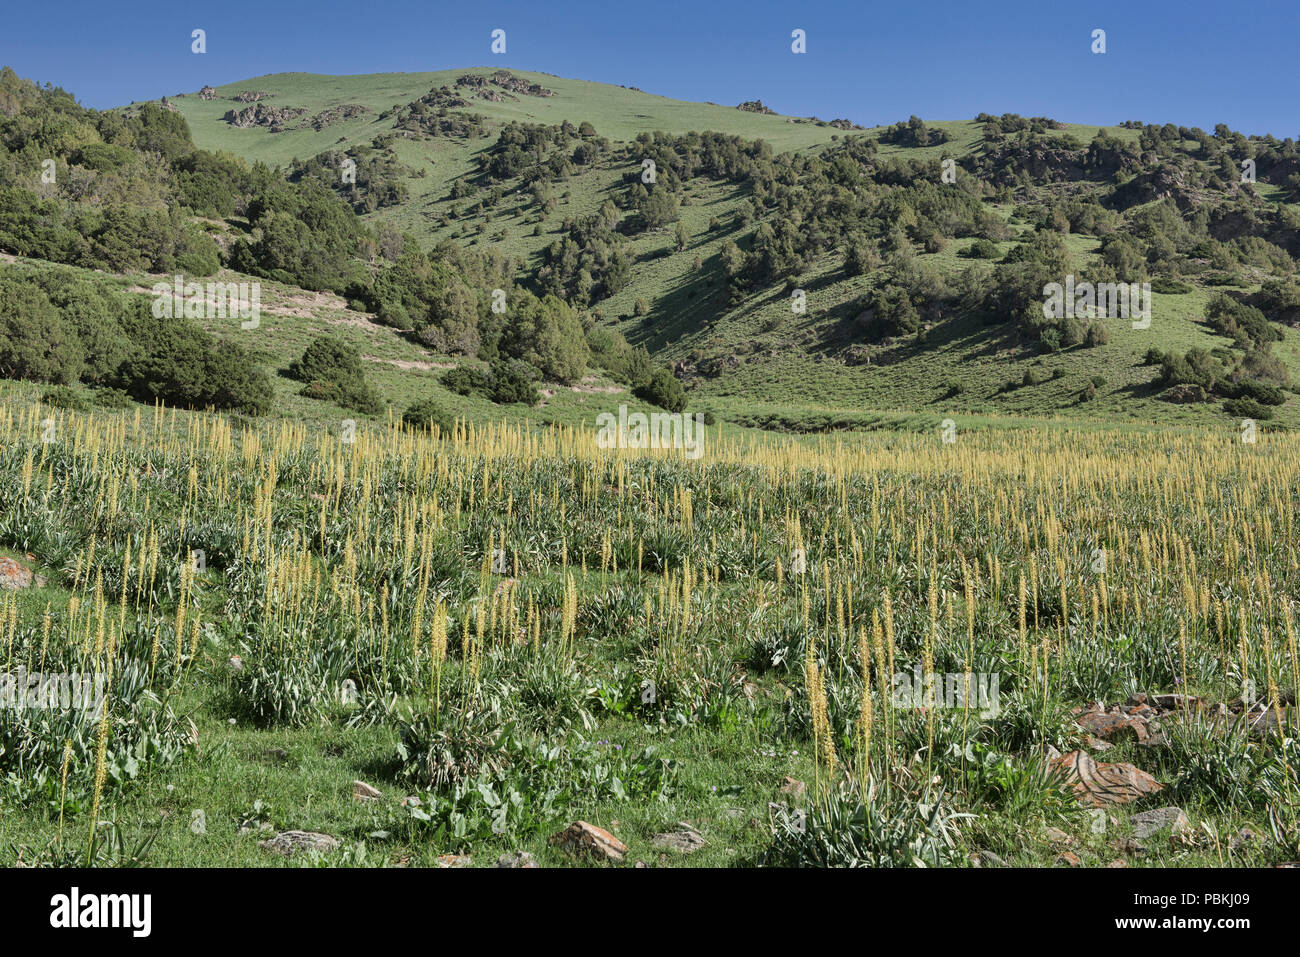 Beautiful foxtail lilies (Eremurus) on the Heights of Alay route, Alay, Kygyzstan Stock Photo